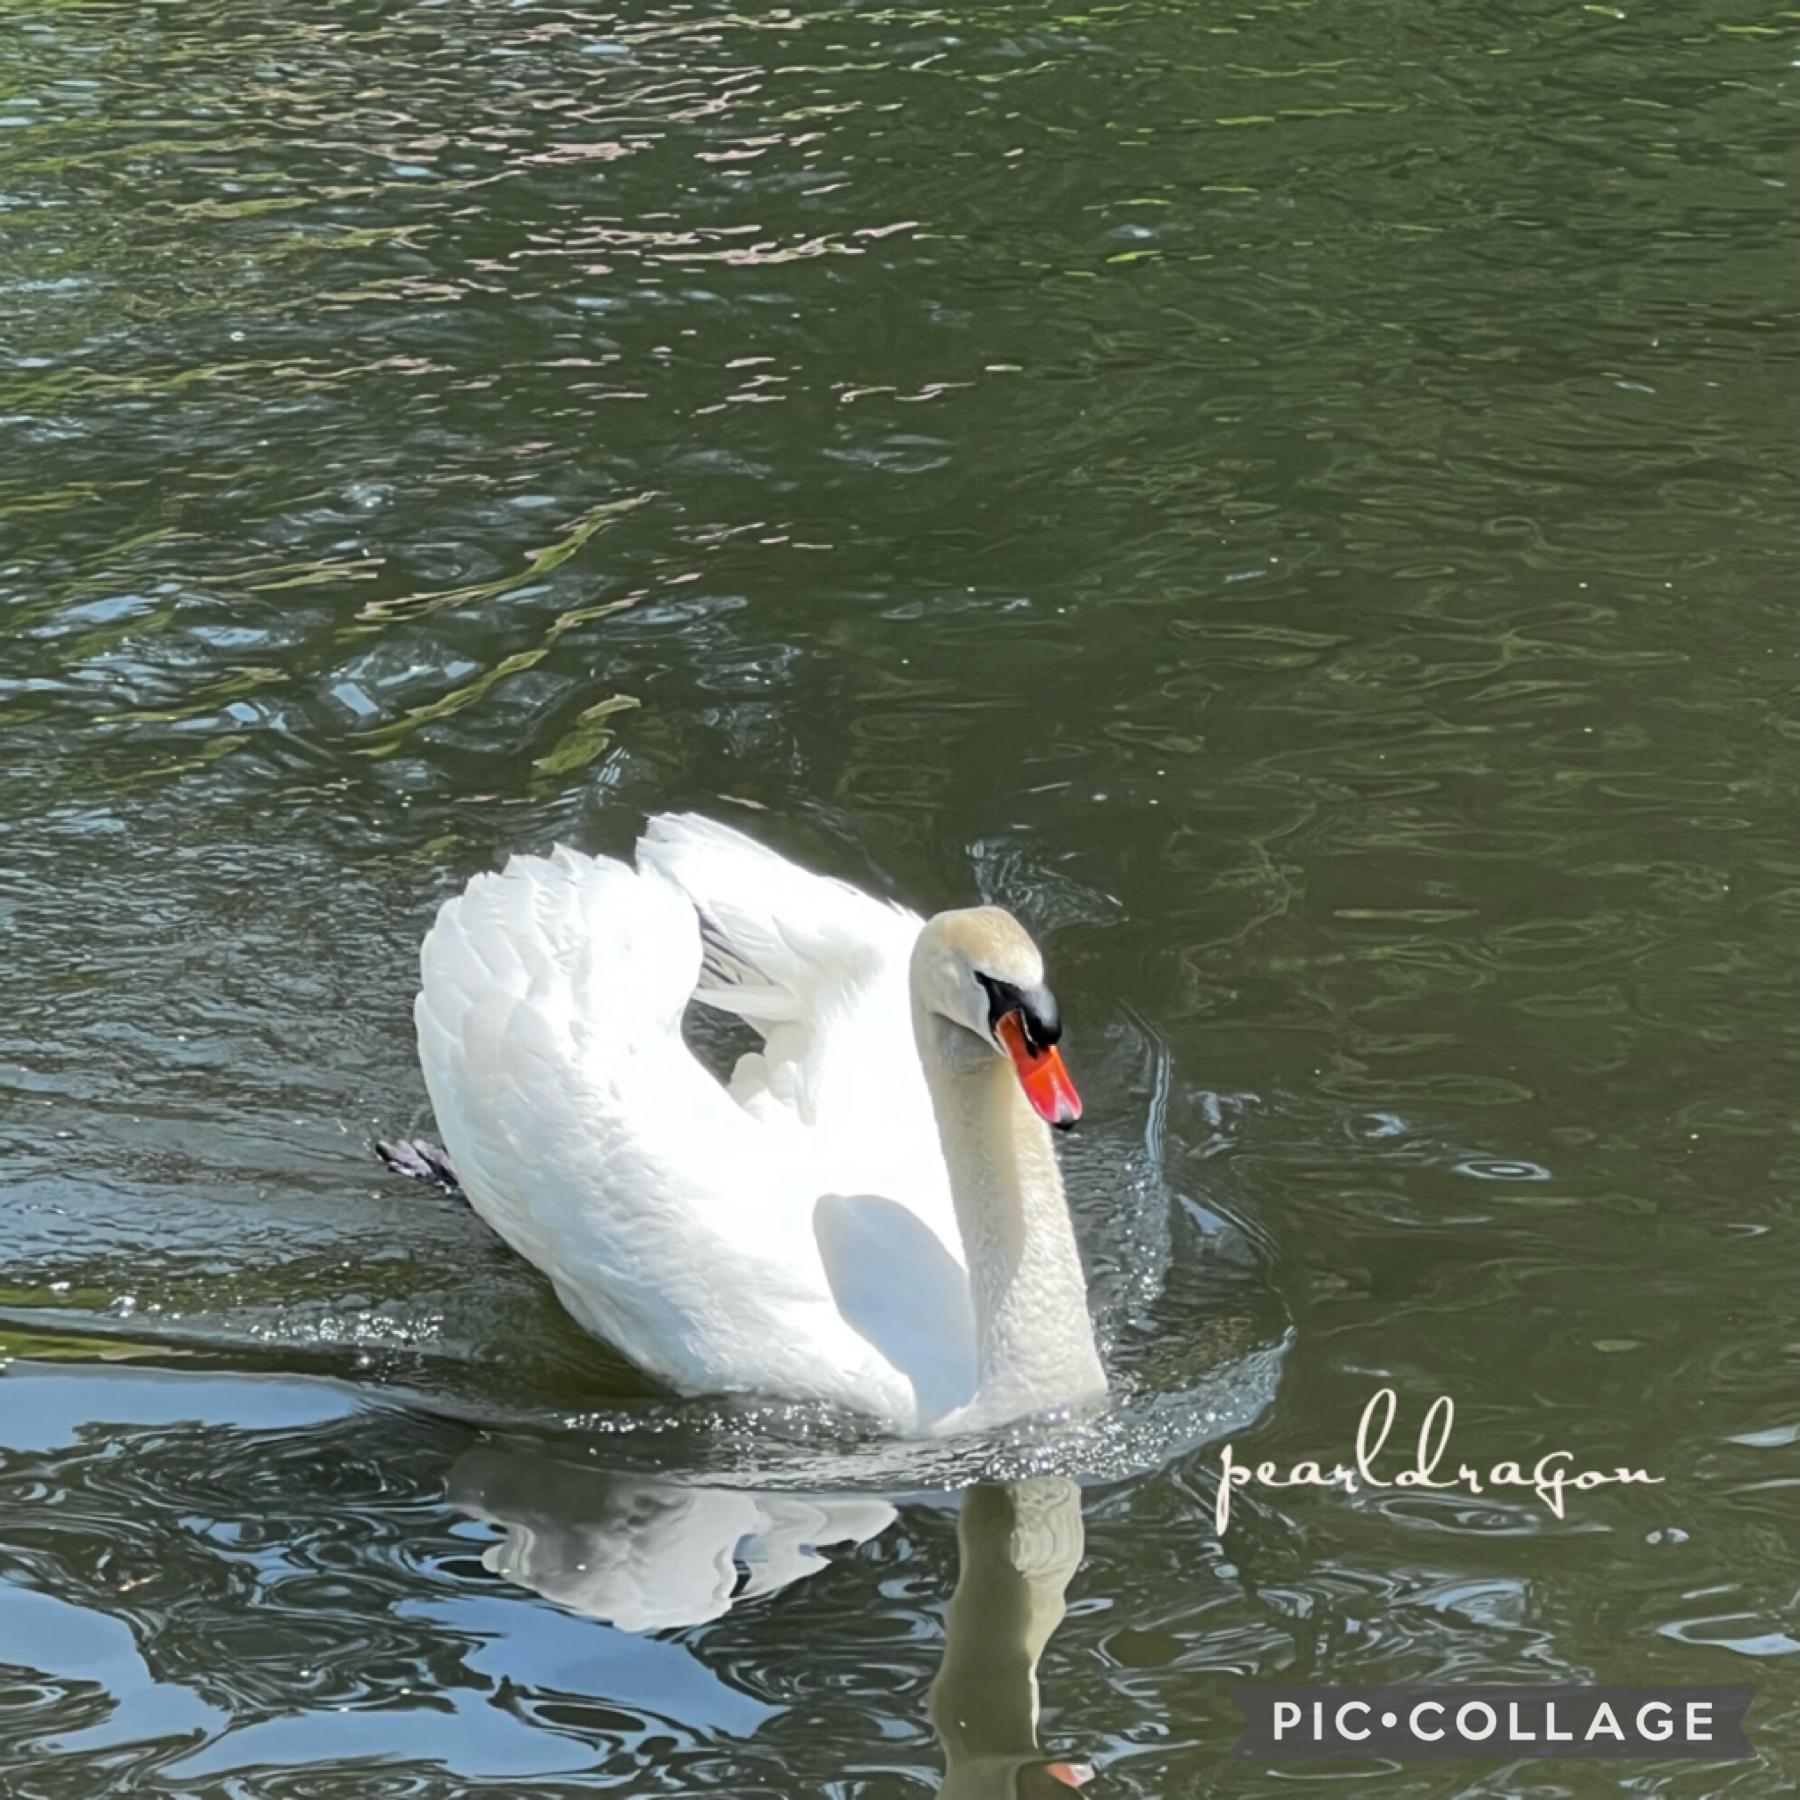 🦢tap🦢
The swan was low key staring at me while I was taking the picture lol